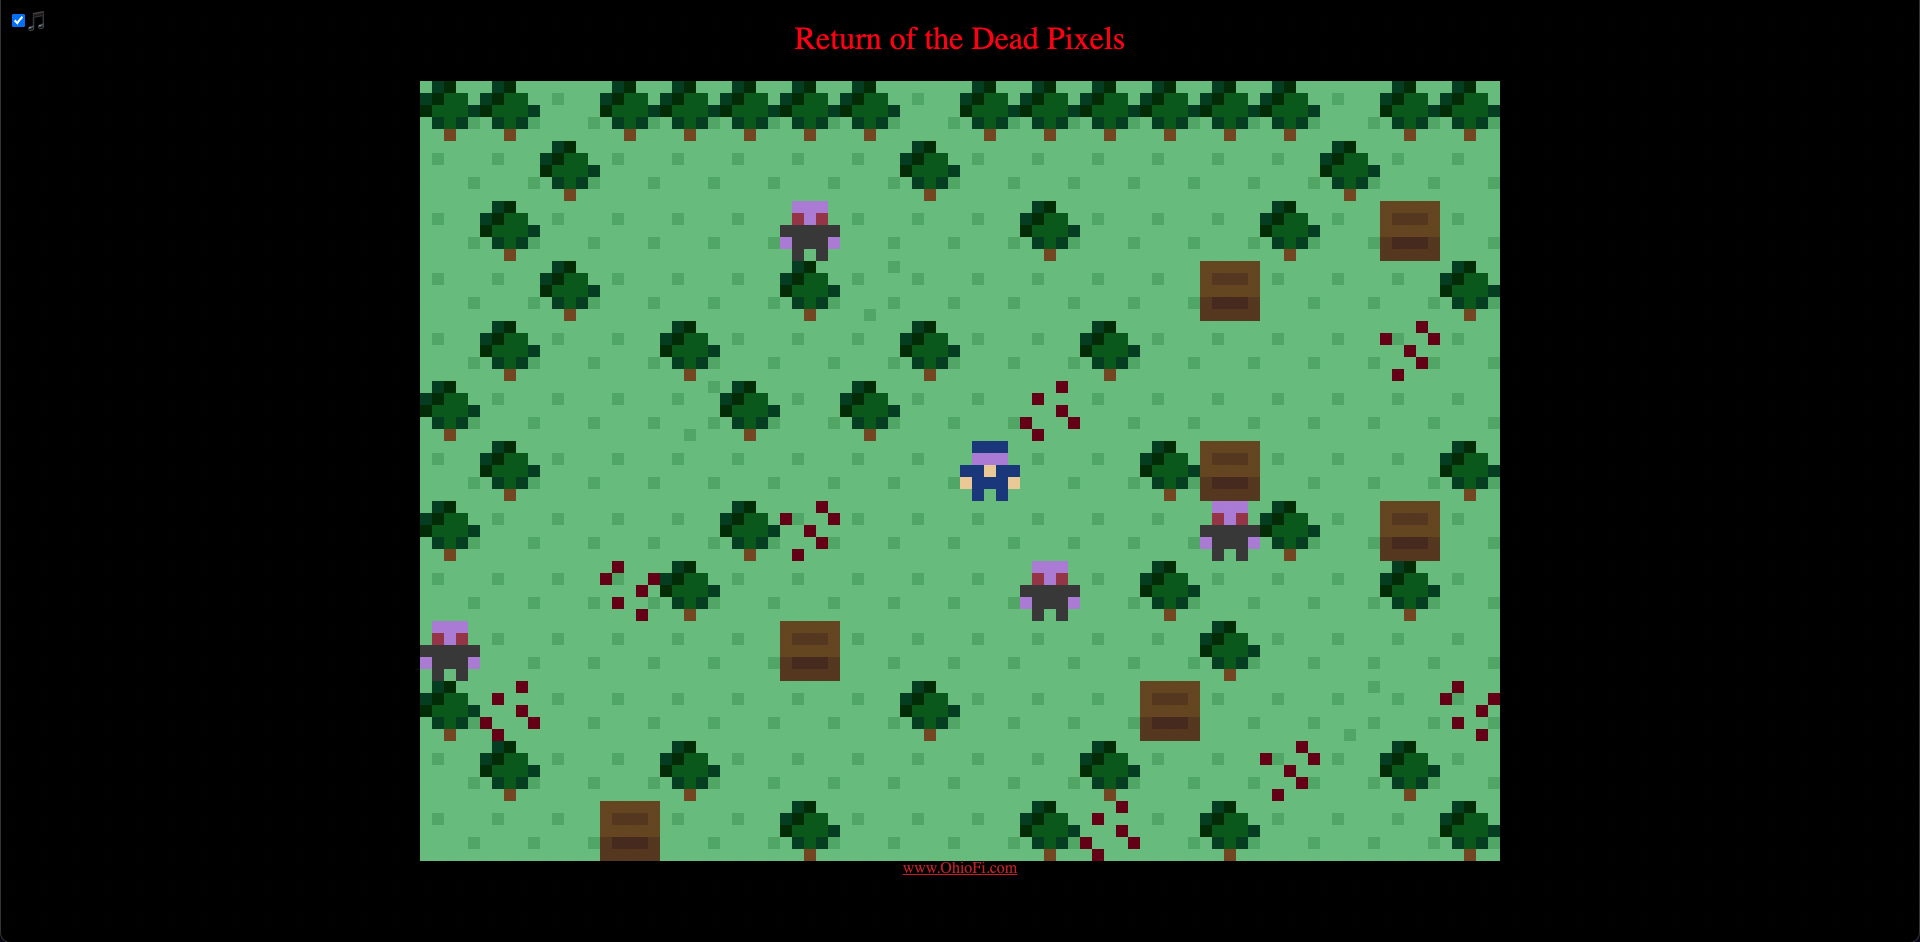 Screen shot from the video game 'Return of the Dead Pixels' showing player surrounded by zombies